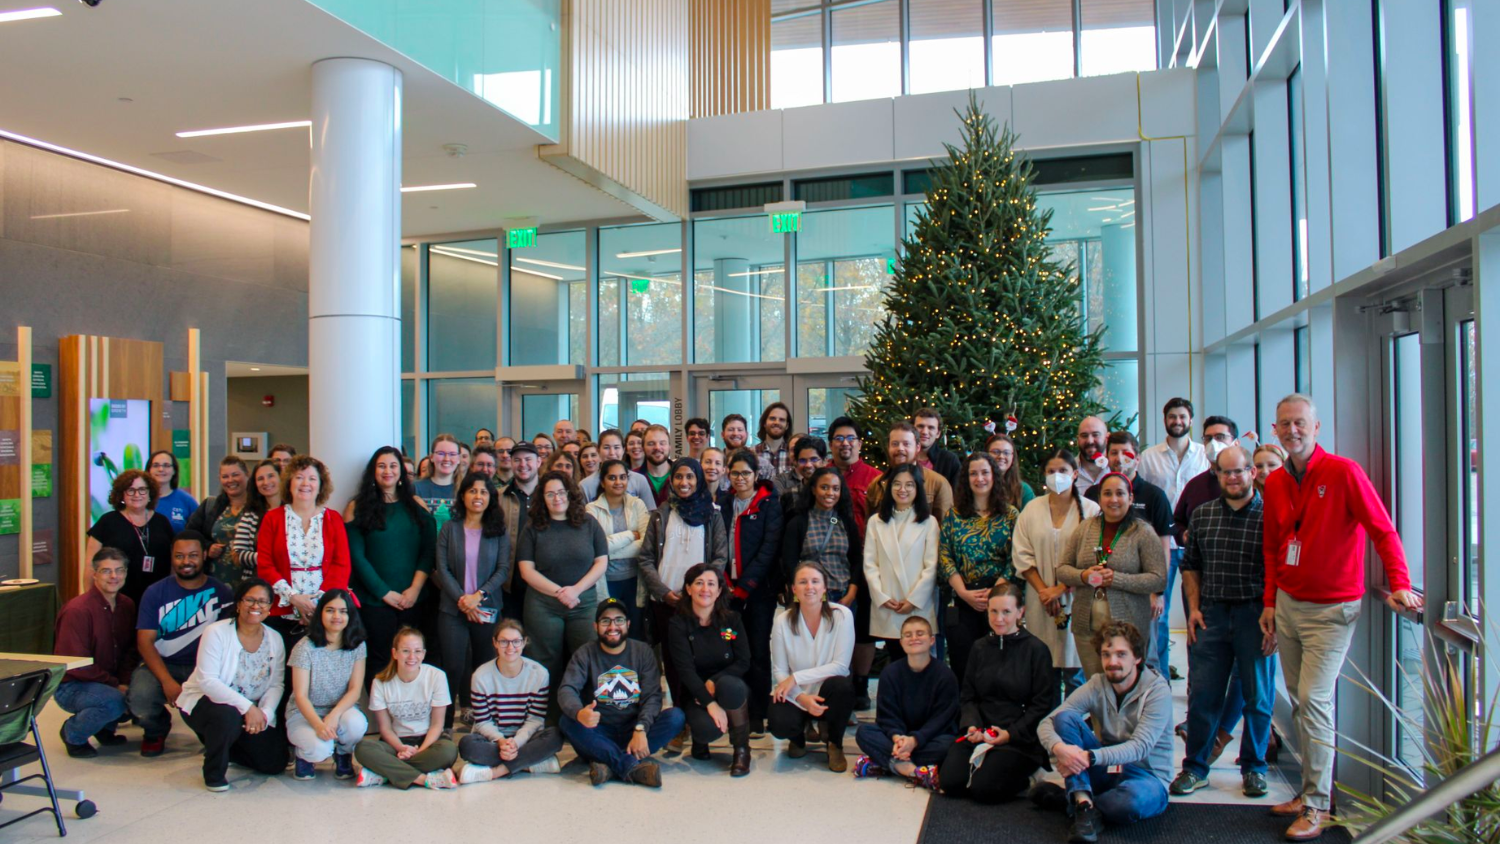 N.C. PSI researchers in front of the holiday tree